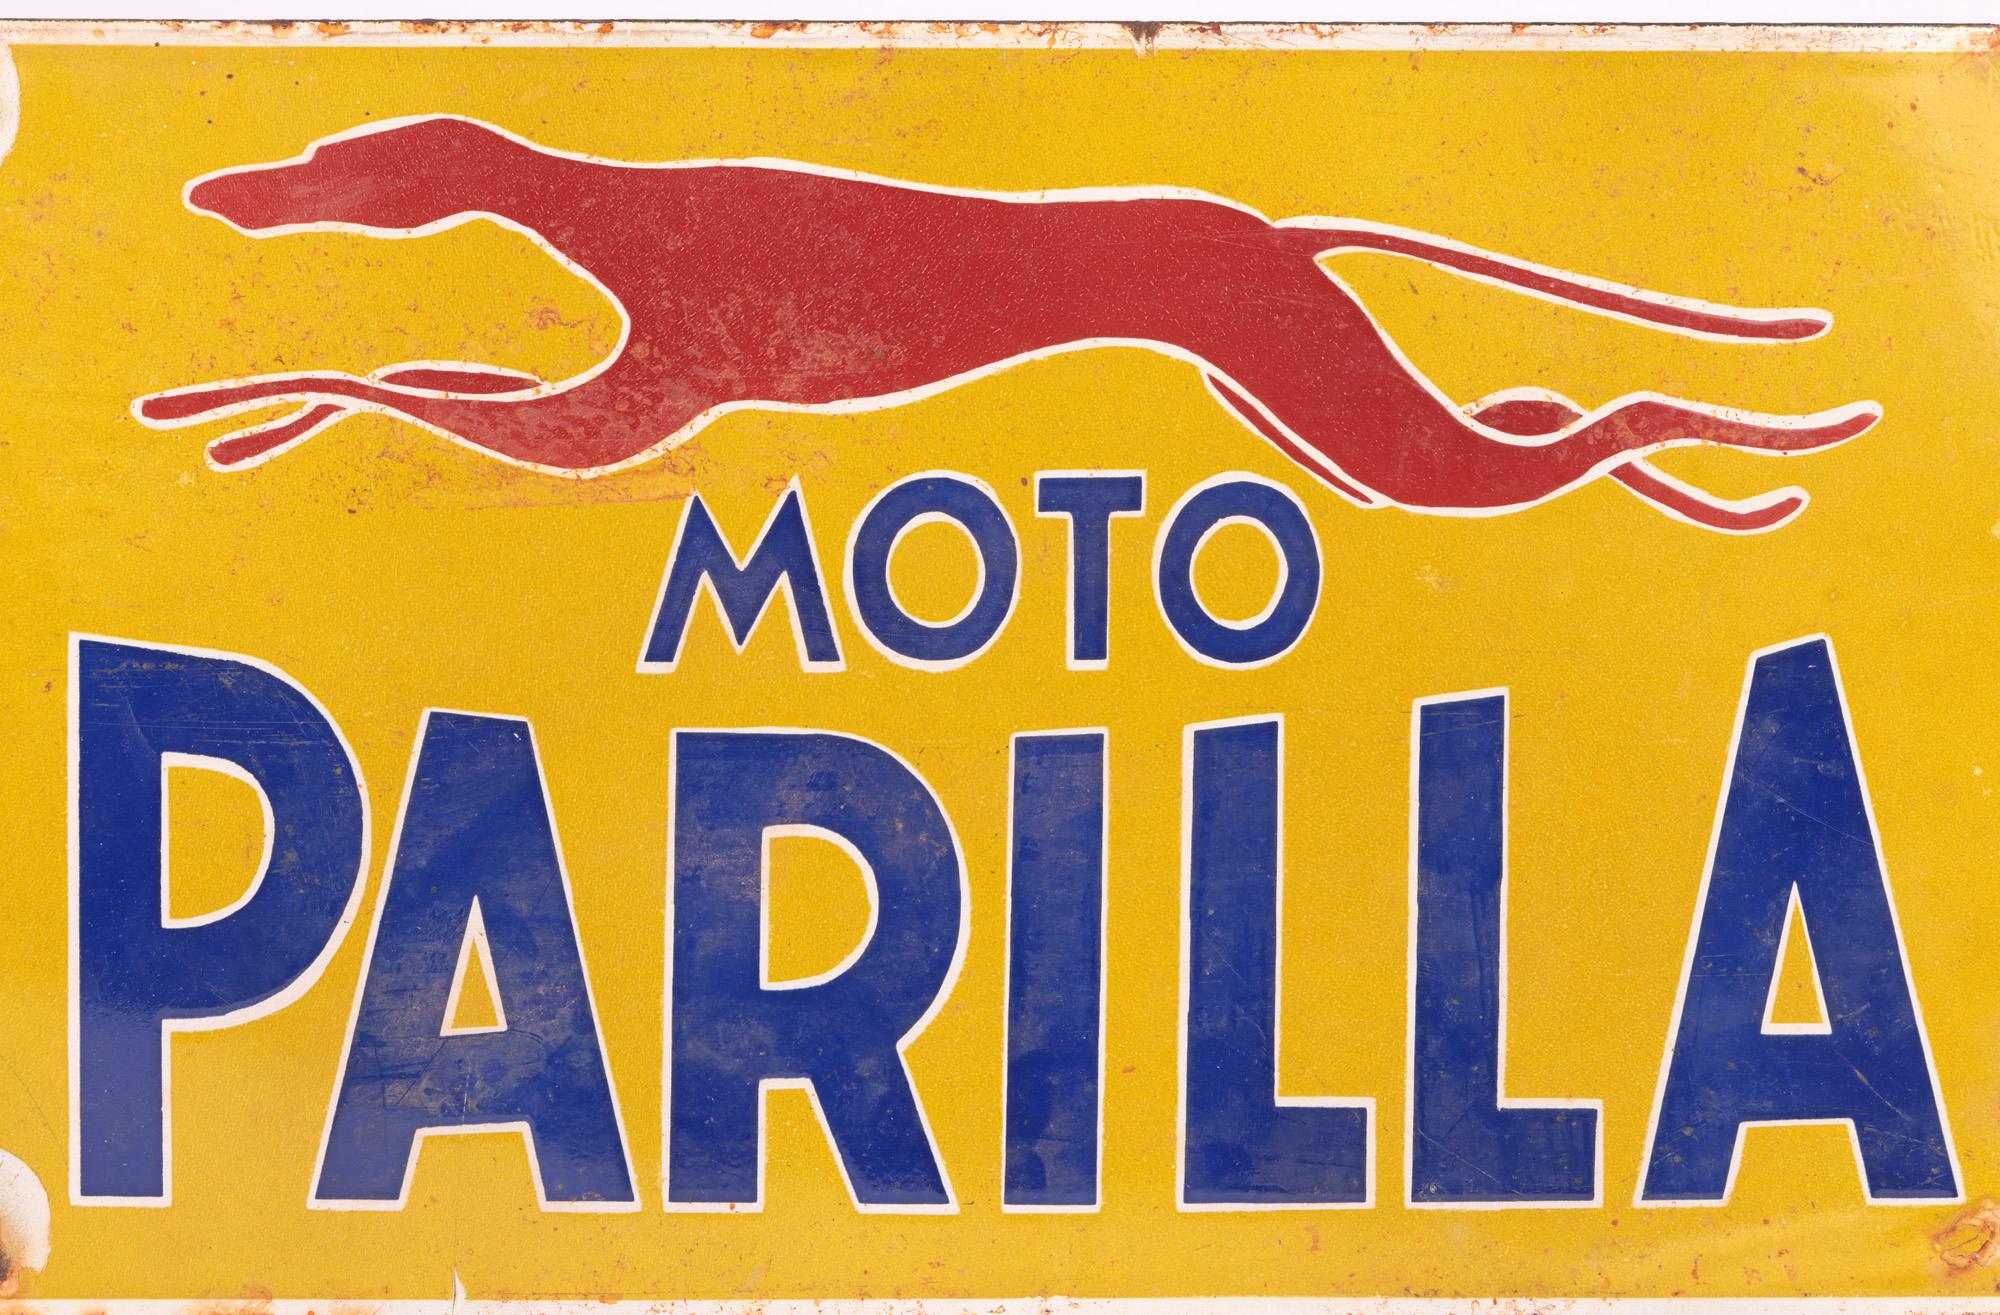 A very stylish mid-century Italian enamel signed advertising Moto Parilla motorcycles dating from around 1955. The sign of rectangular shape is heavily made and coated in thick enamels with the running dog motif in red and lettering MOTO PARILLA in